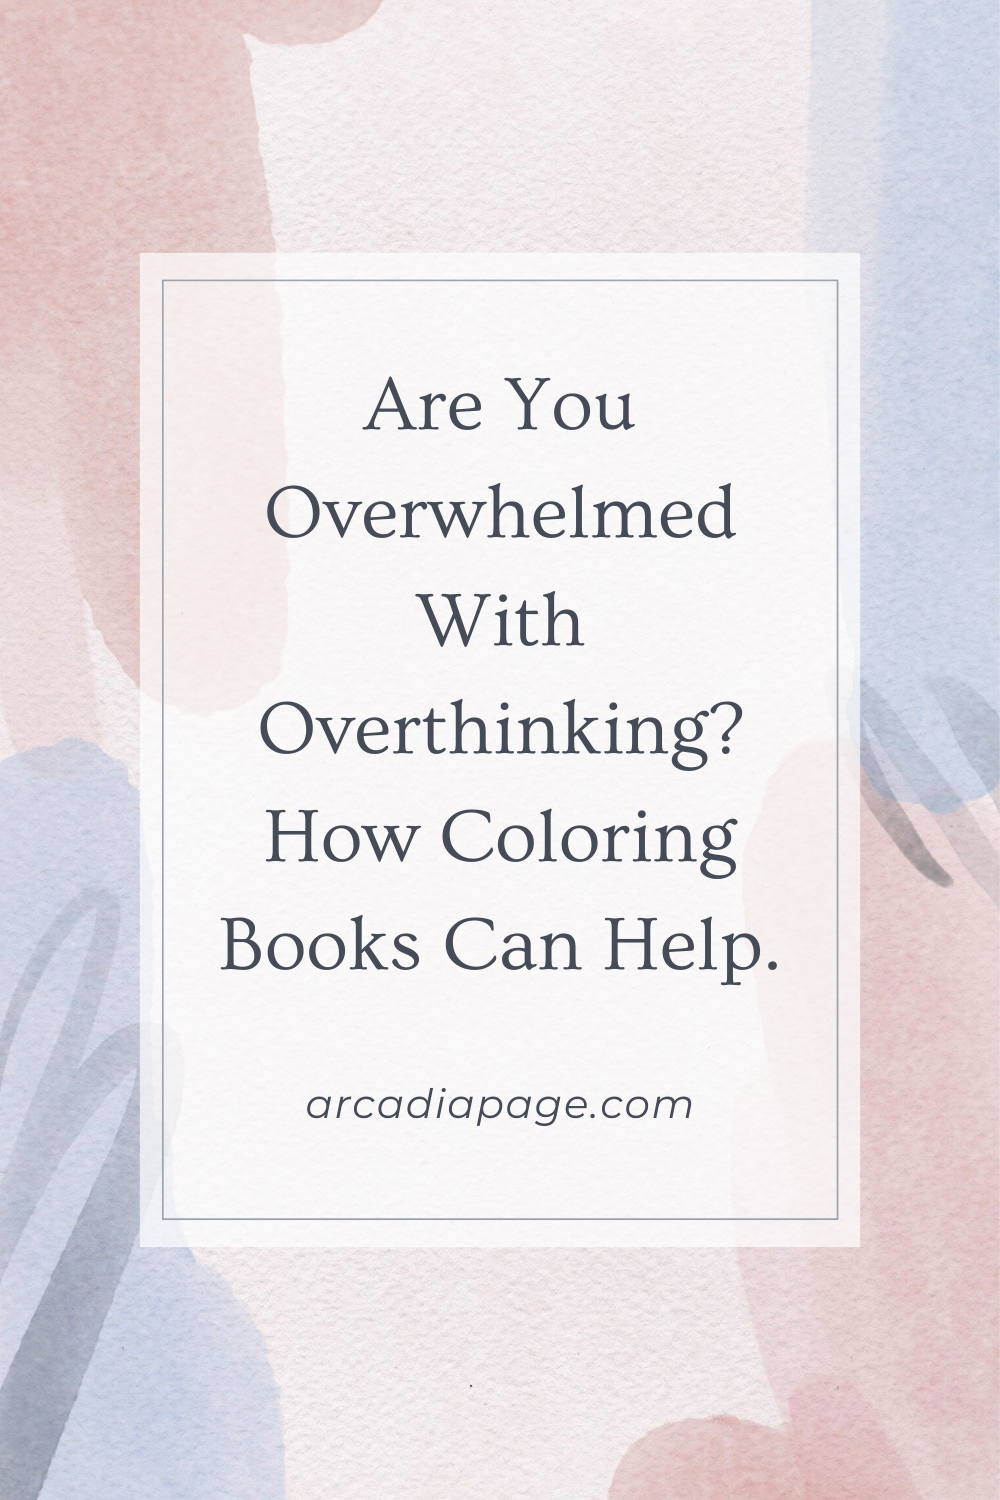 Coloring books can relieve anxiety and stress